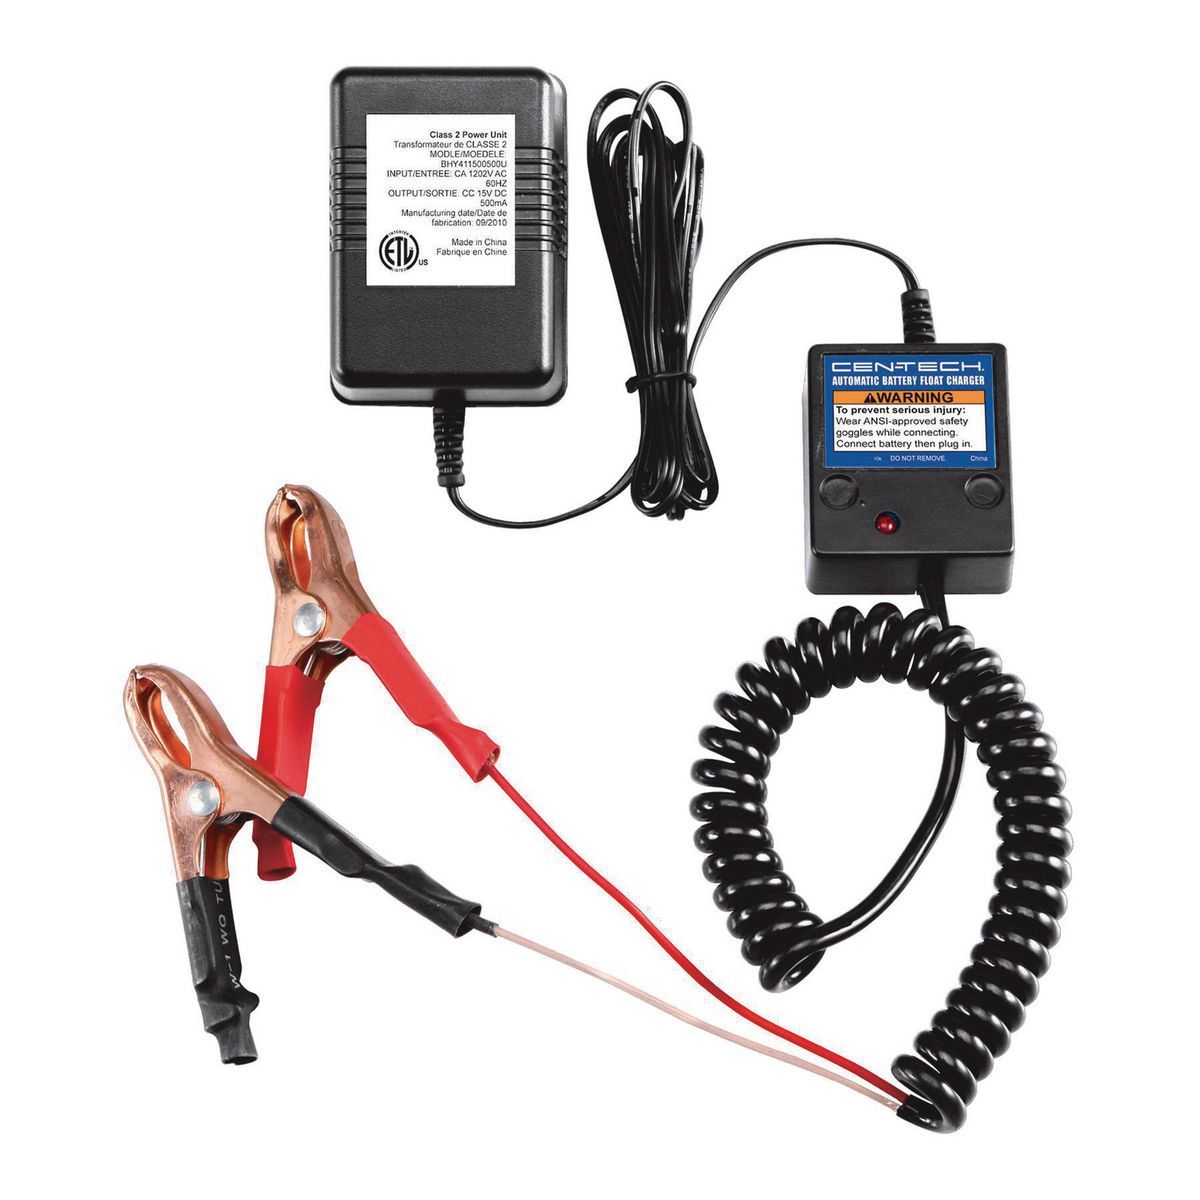 630 Peak Amp Portable Car Battery Jump Starter and Power Pack with 150 PSI  Air Compressor